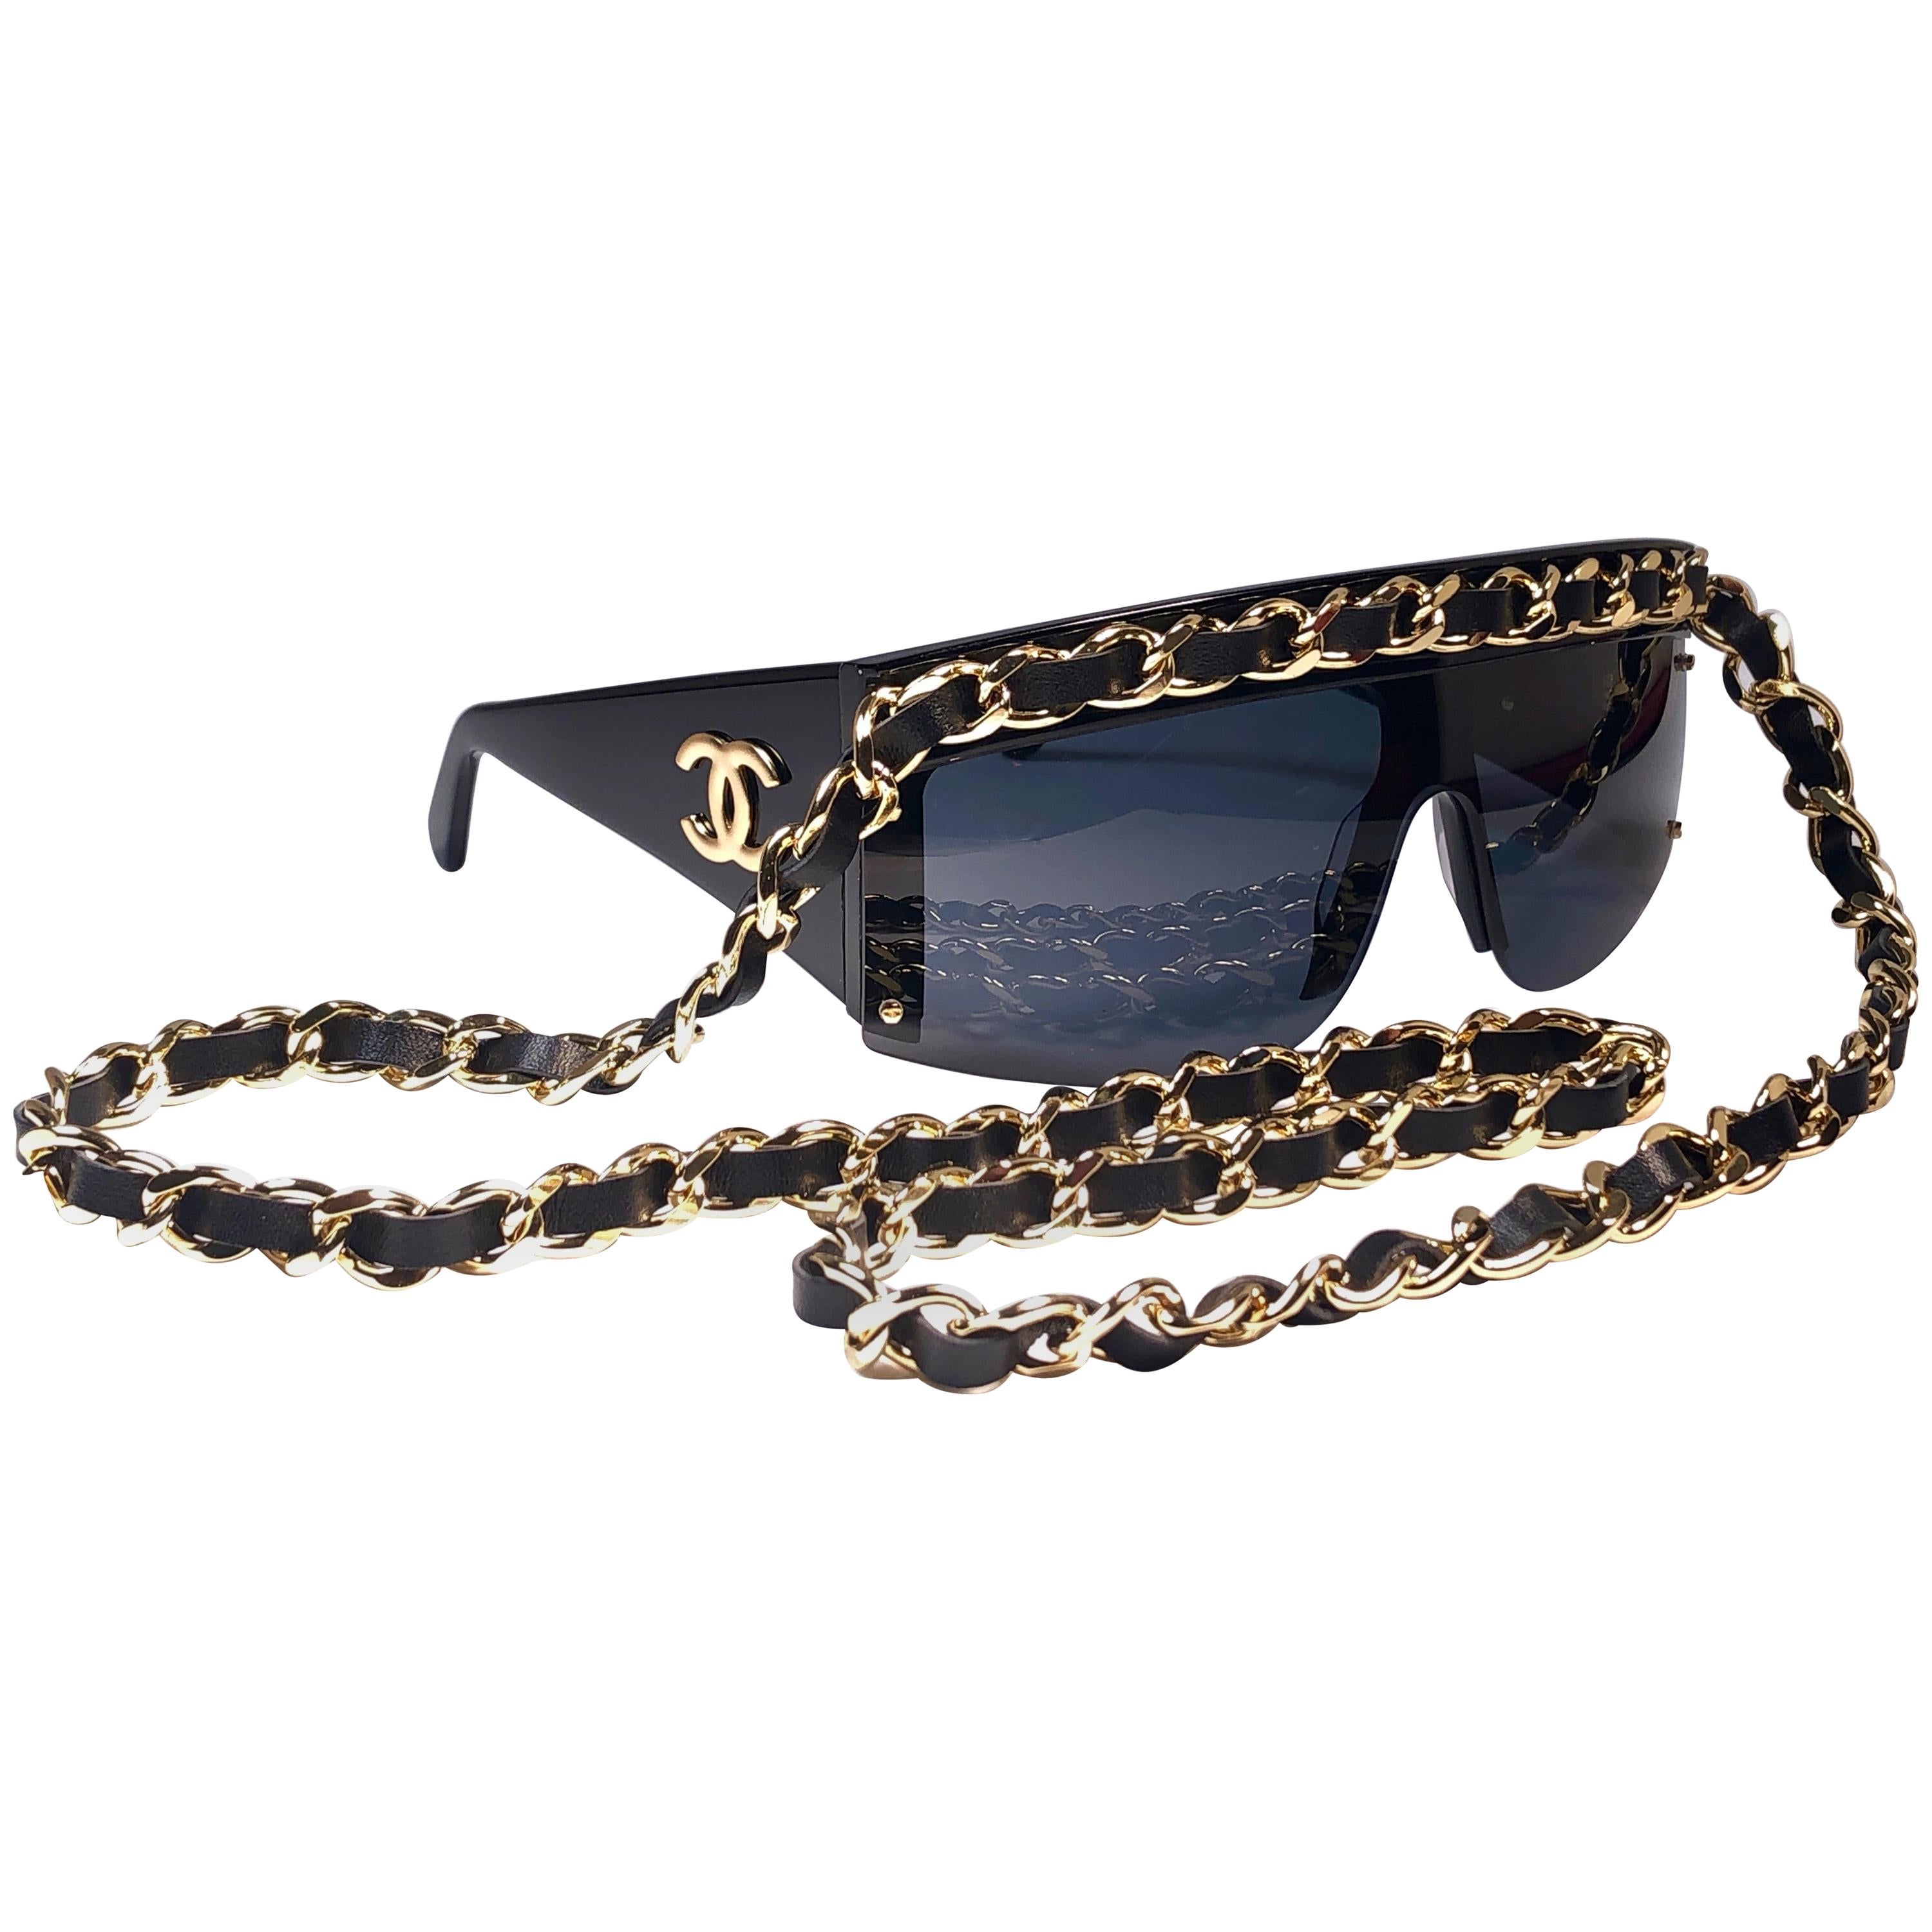 CHANEL 0027 LADY GAGA EXCLUSIVE & TIMELESS